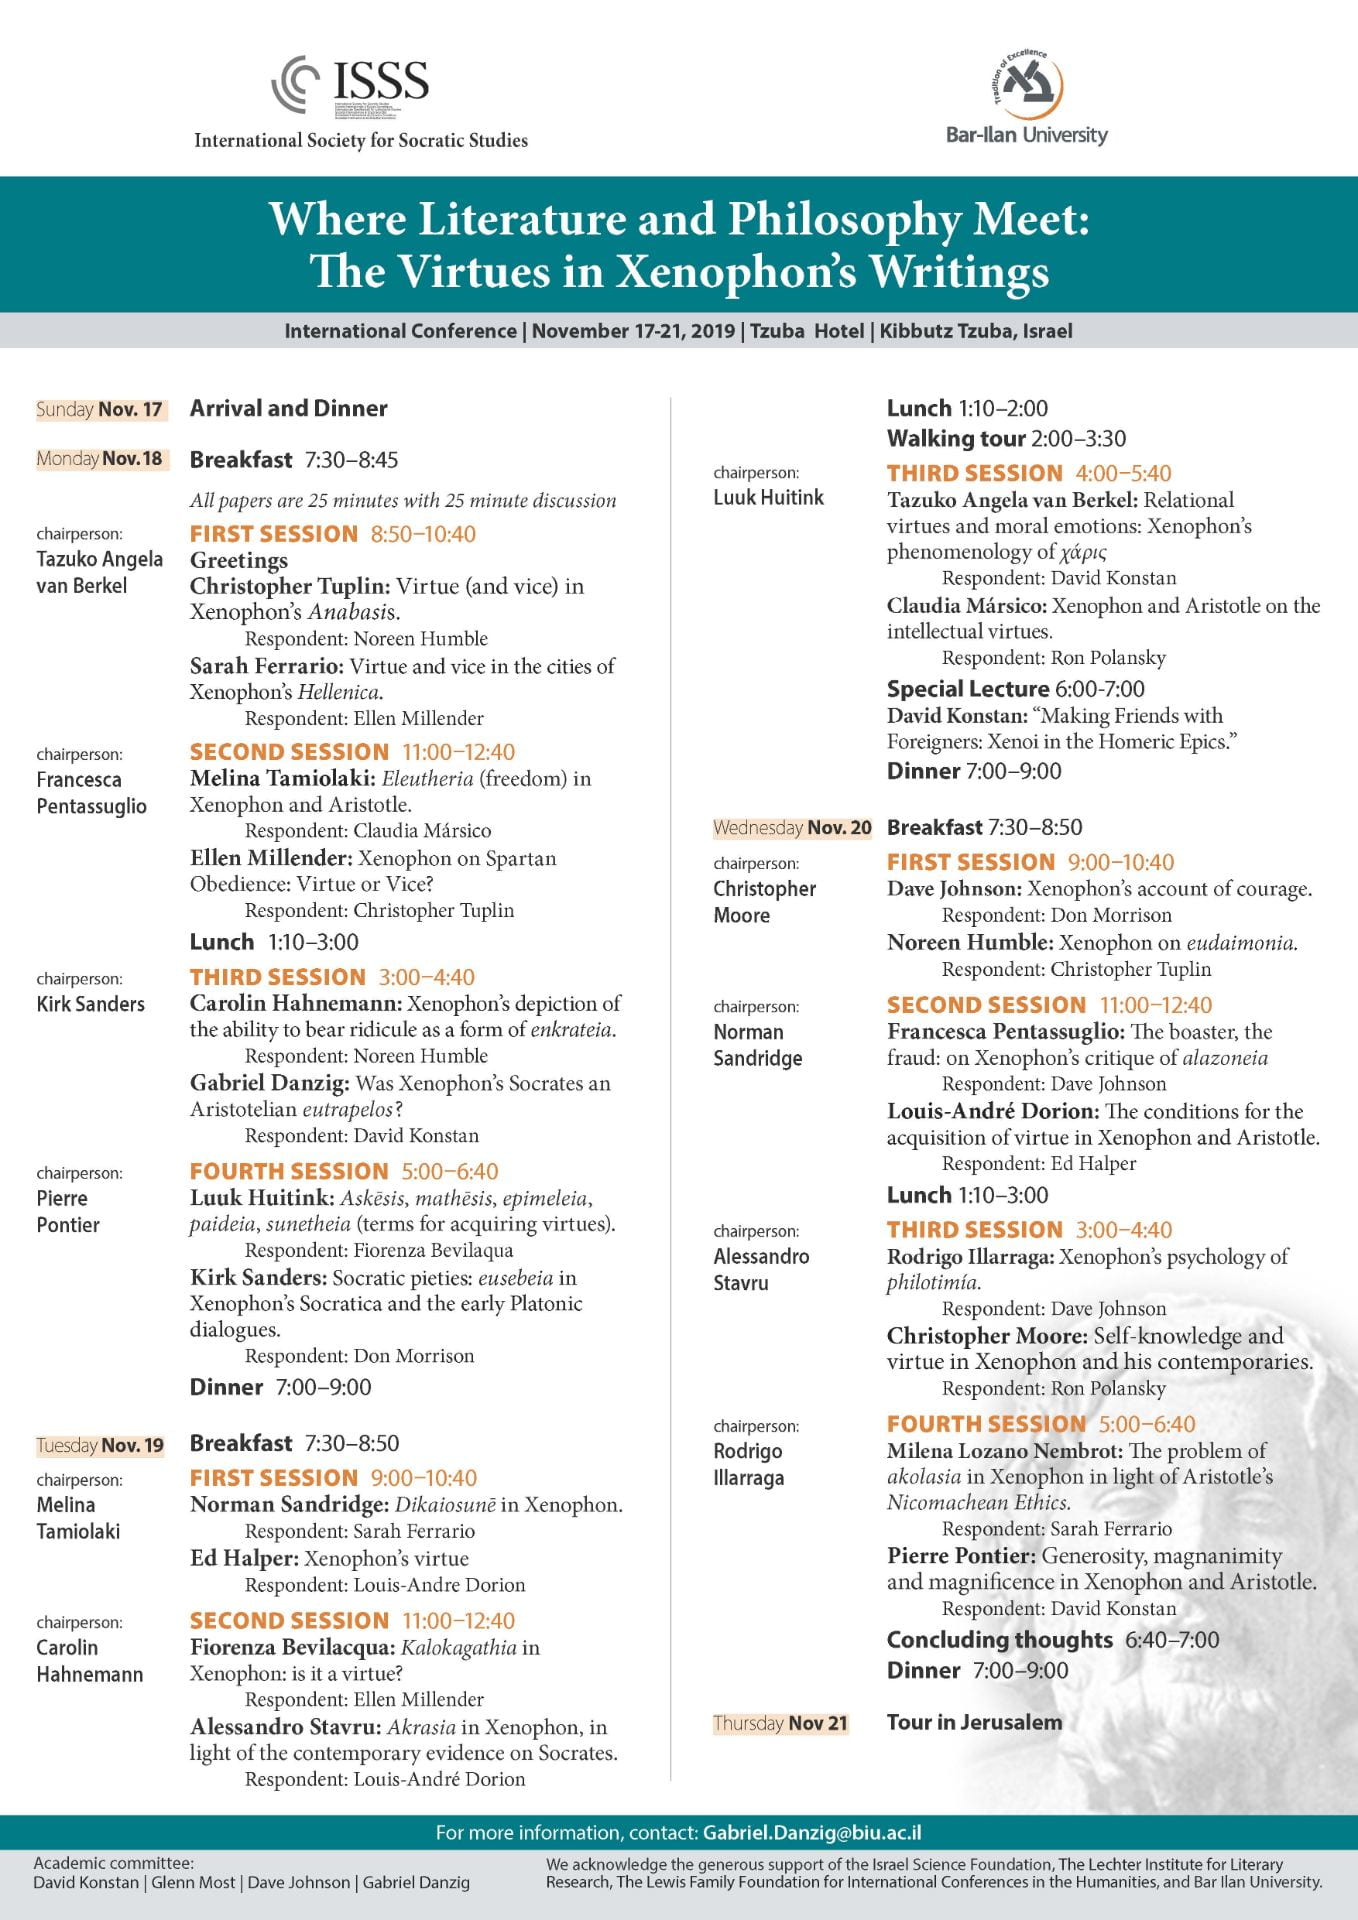 new schedule for Virtues conference